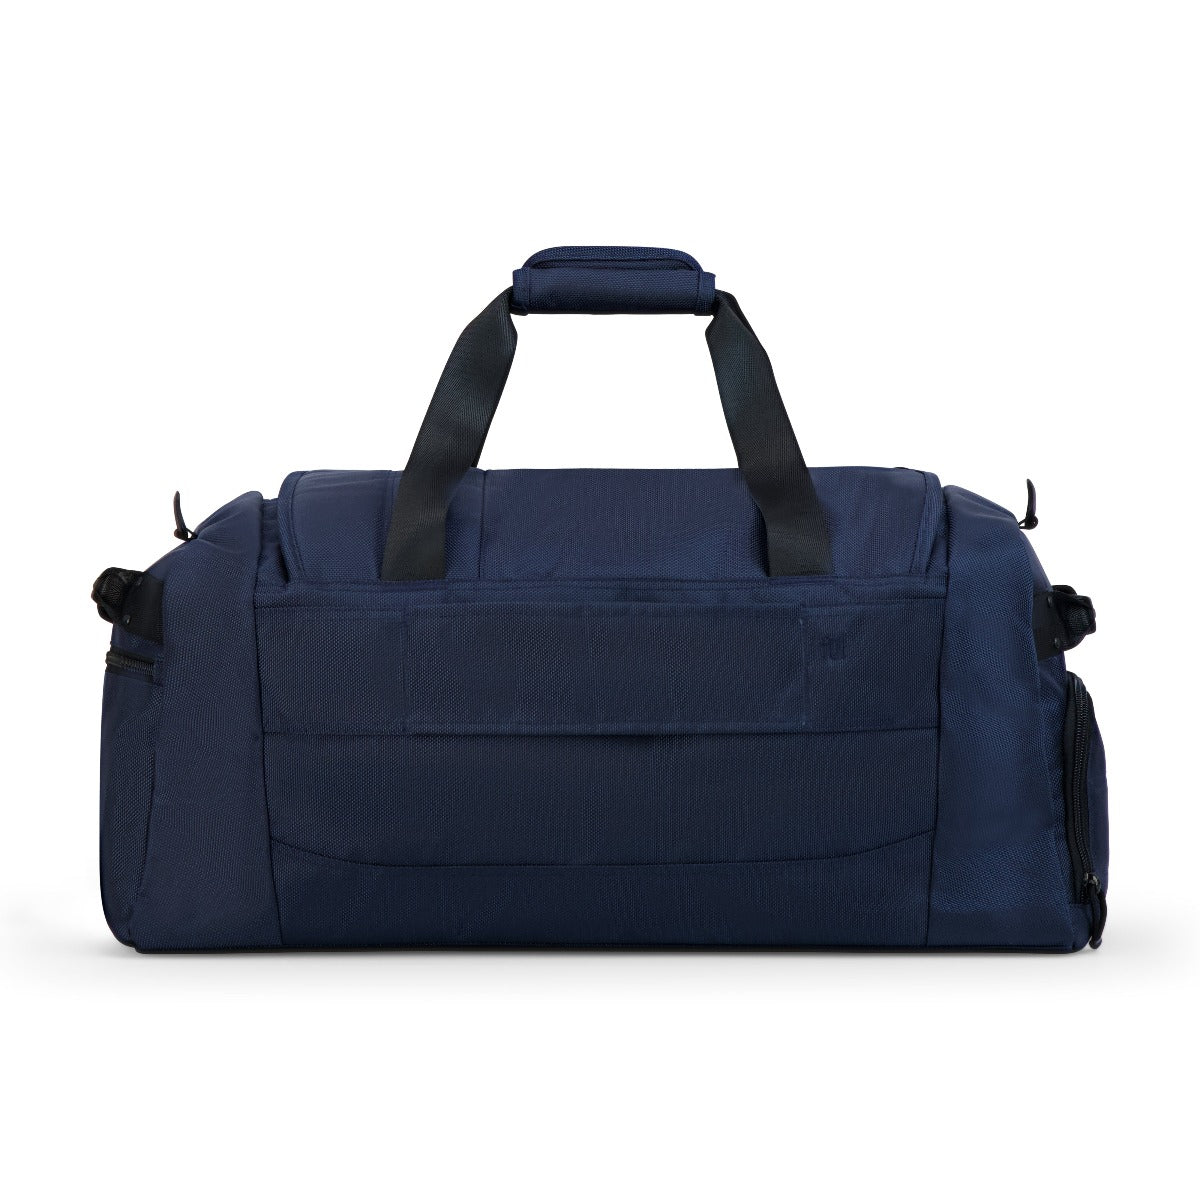 ful tactics collection siege duffle bag navy blue - best duffle bags for travelling